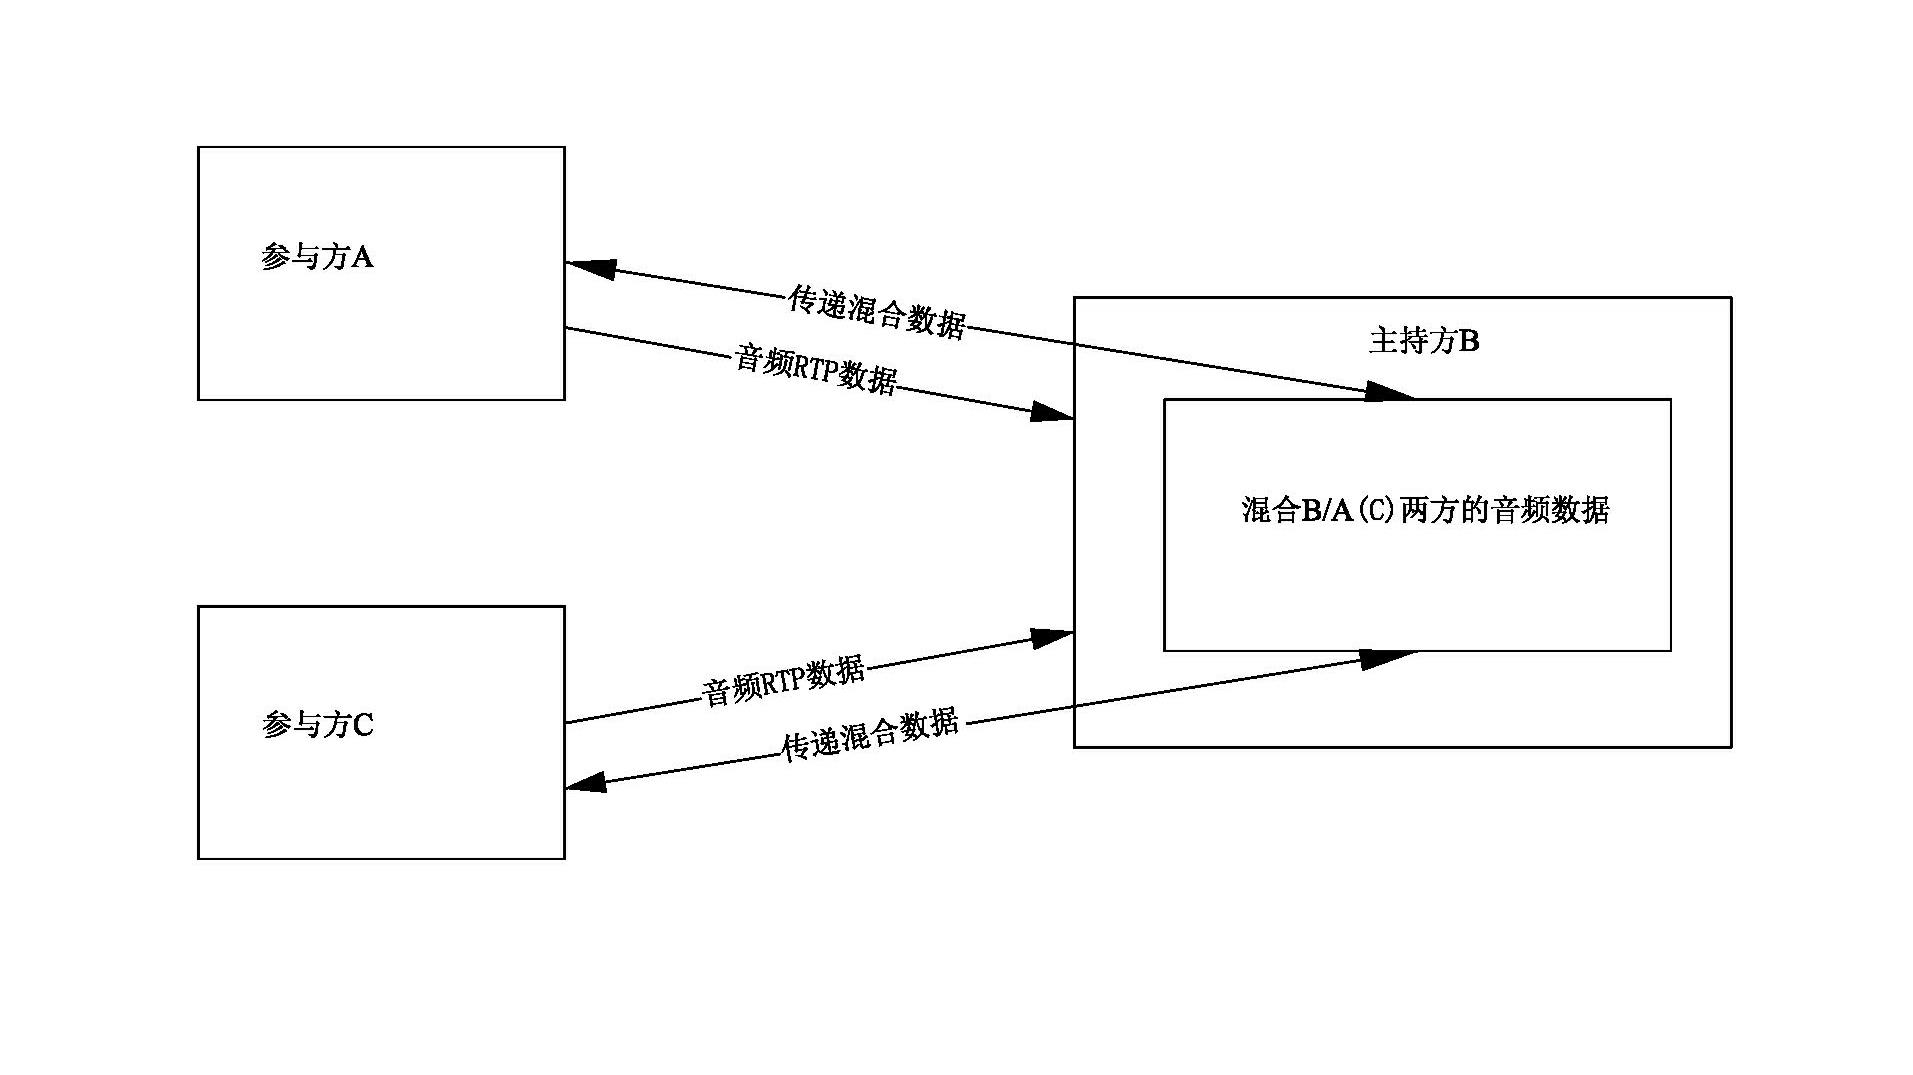 Video implementation method for trilateral video conference